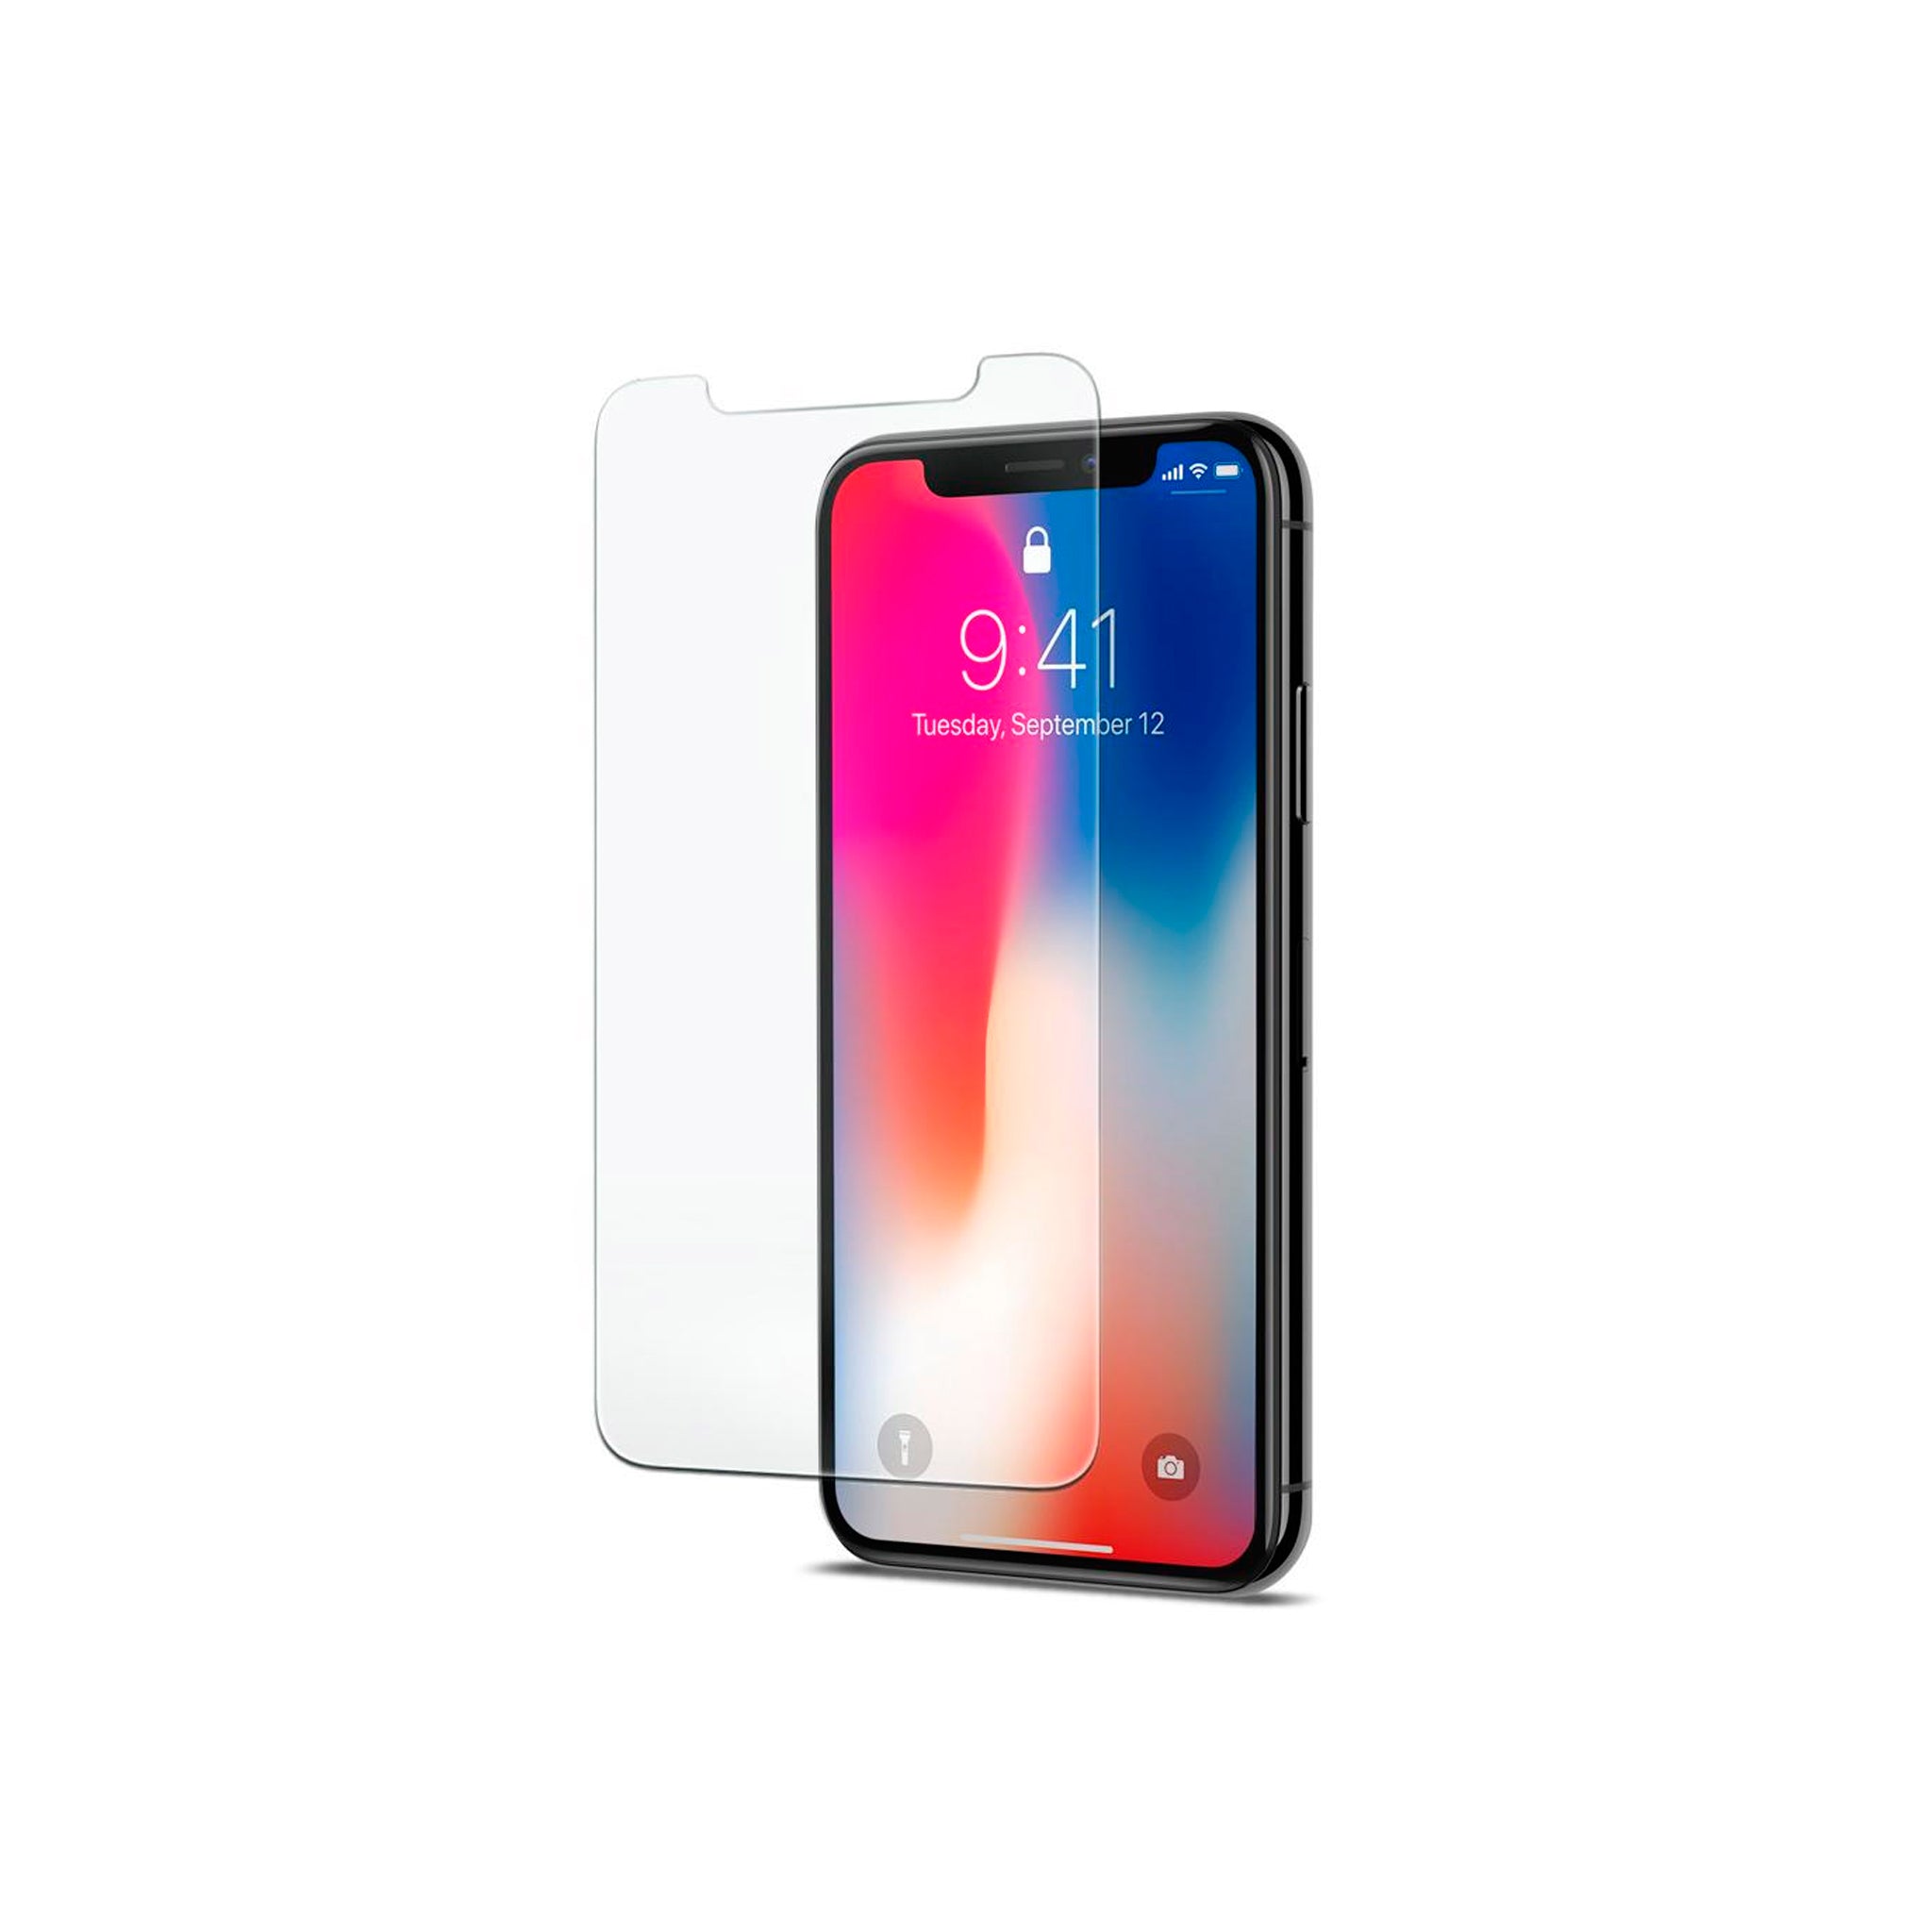 Spigen - Glas.tr Glass Screen Protector For Apple Iphone 11 Pro / Xs / X - Clear